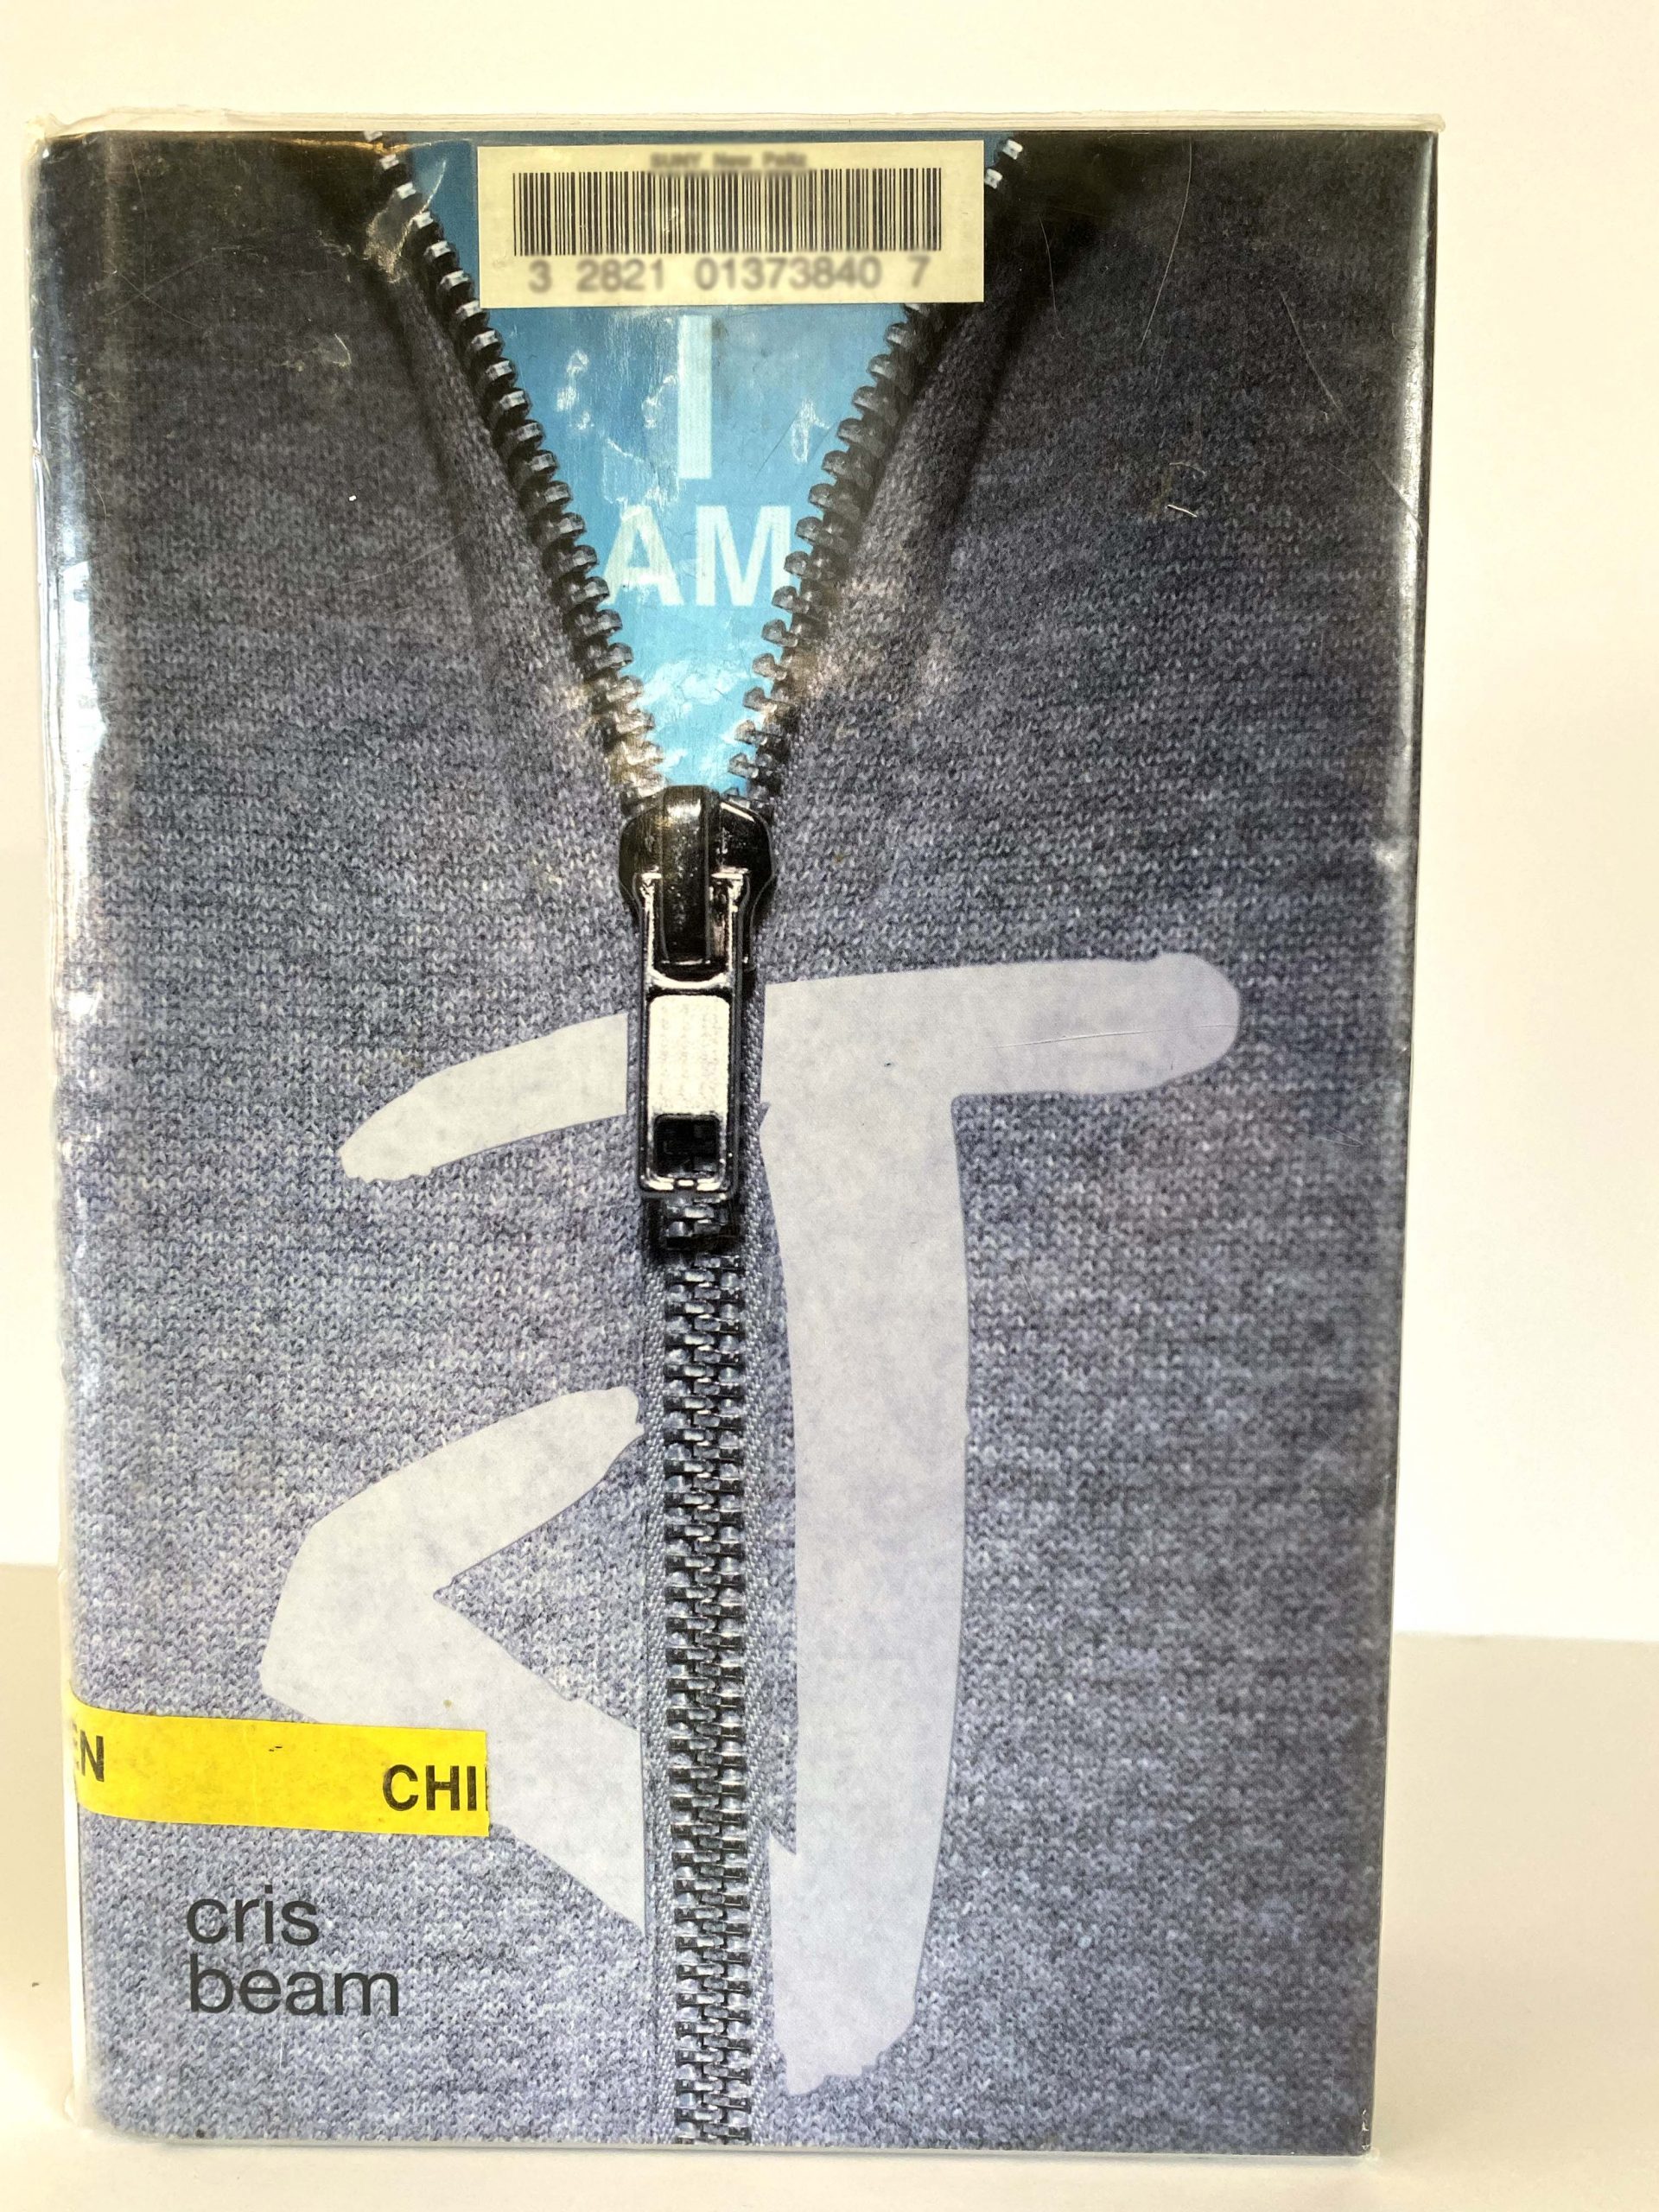 A book with a zipper on its cover.